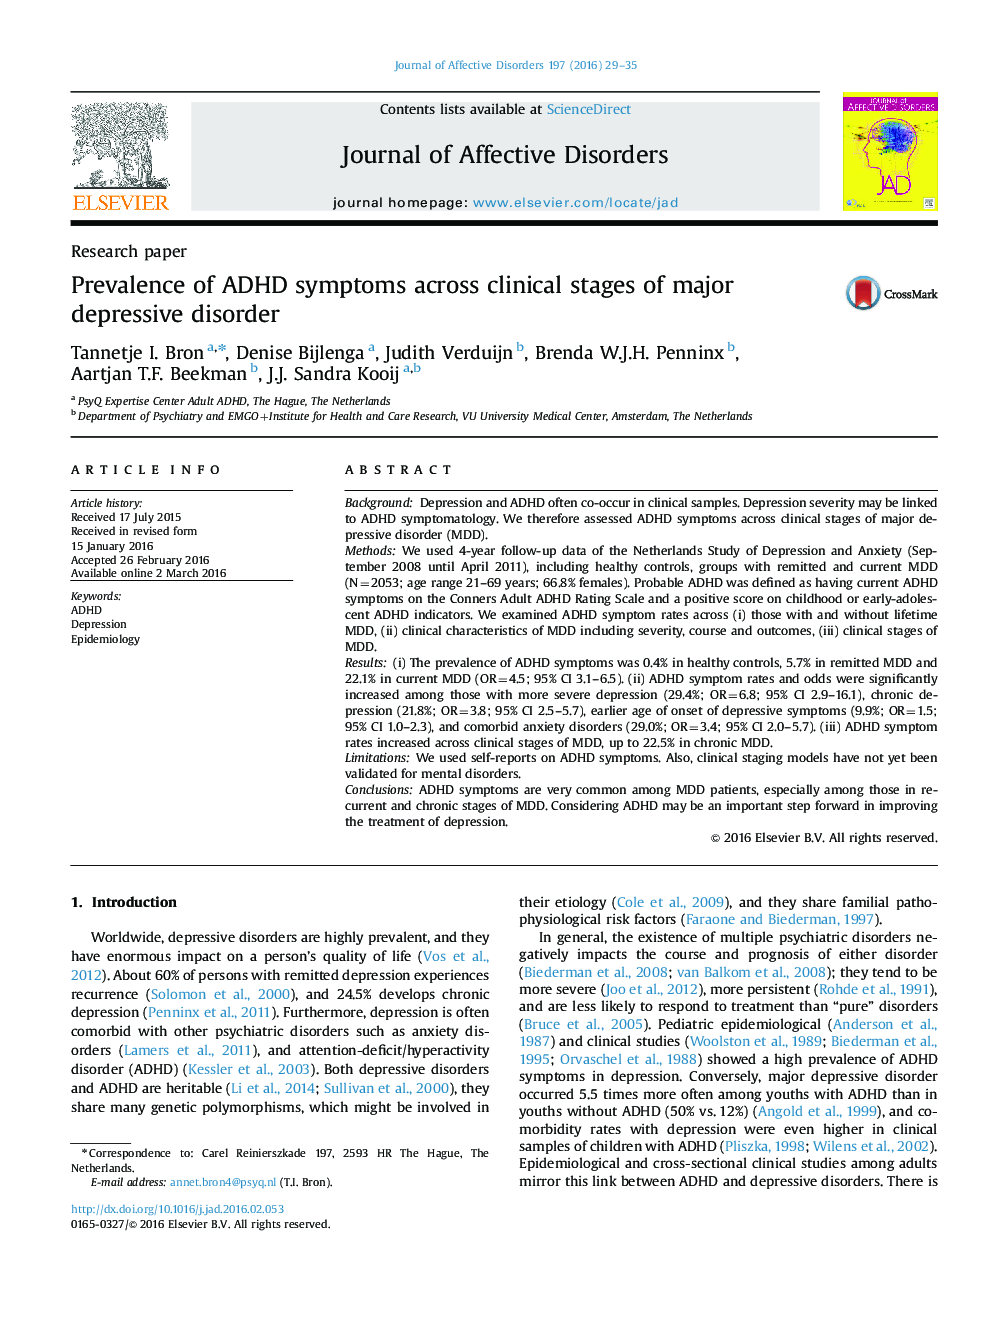 Prevalence of ADHD symptoms across clinical stages of major depressive disorder